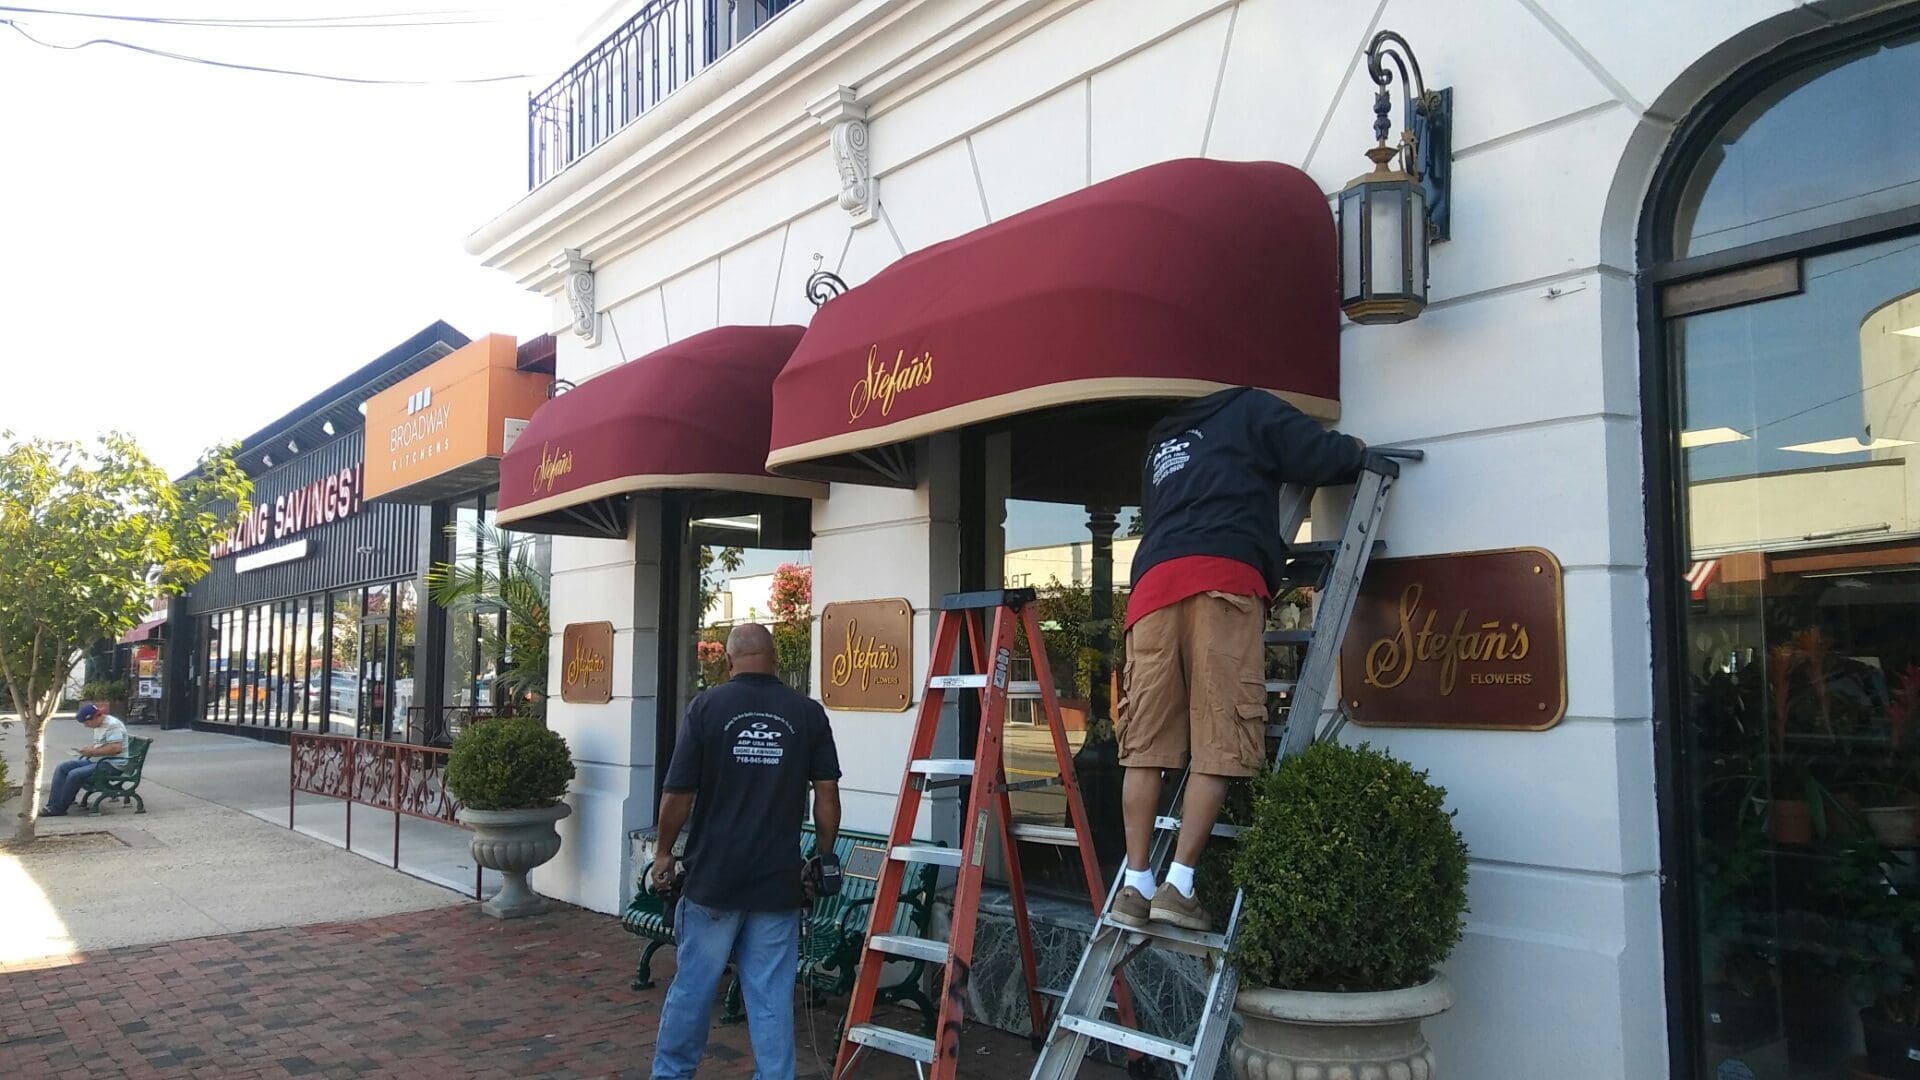 Two workers on ladders installing red awnings on a storefront with the name 